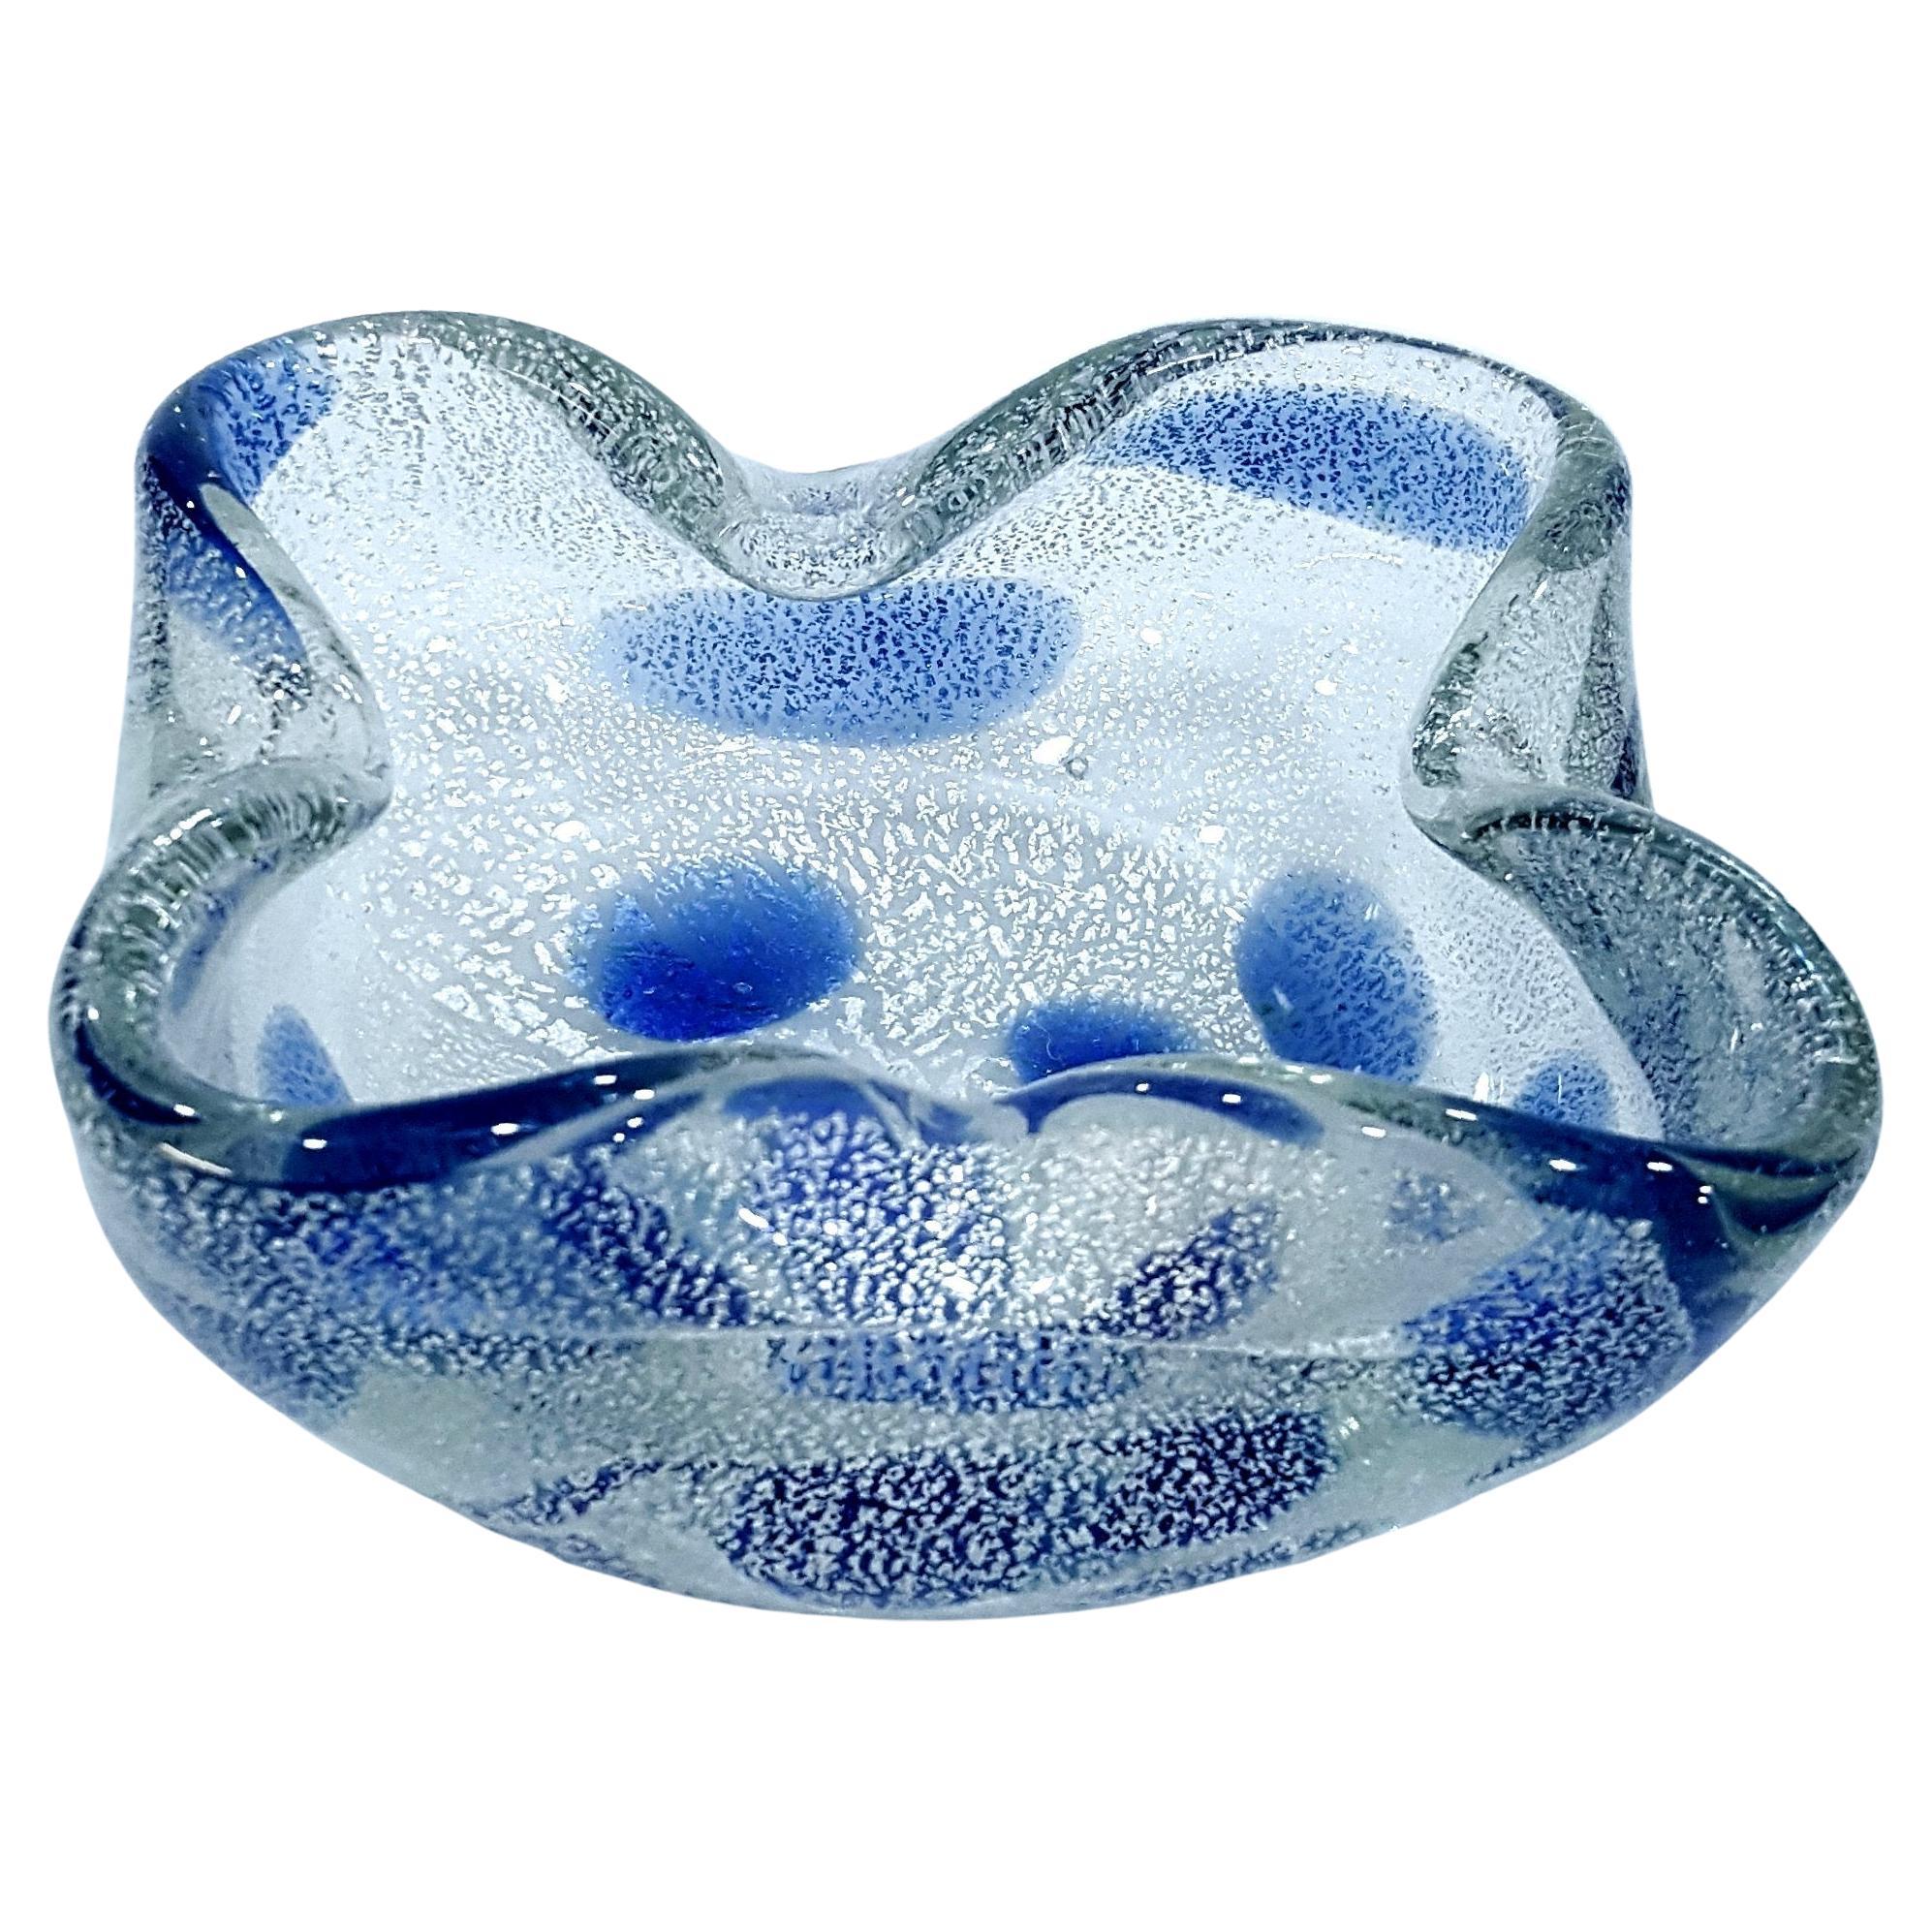 Vintage Murano Glass Bowl, Blue A Macchie & Silver Fleck  - Barovier & Toso For Sale